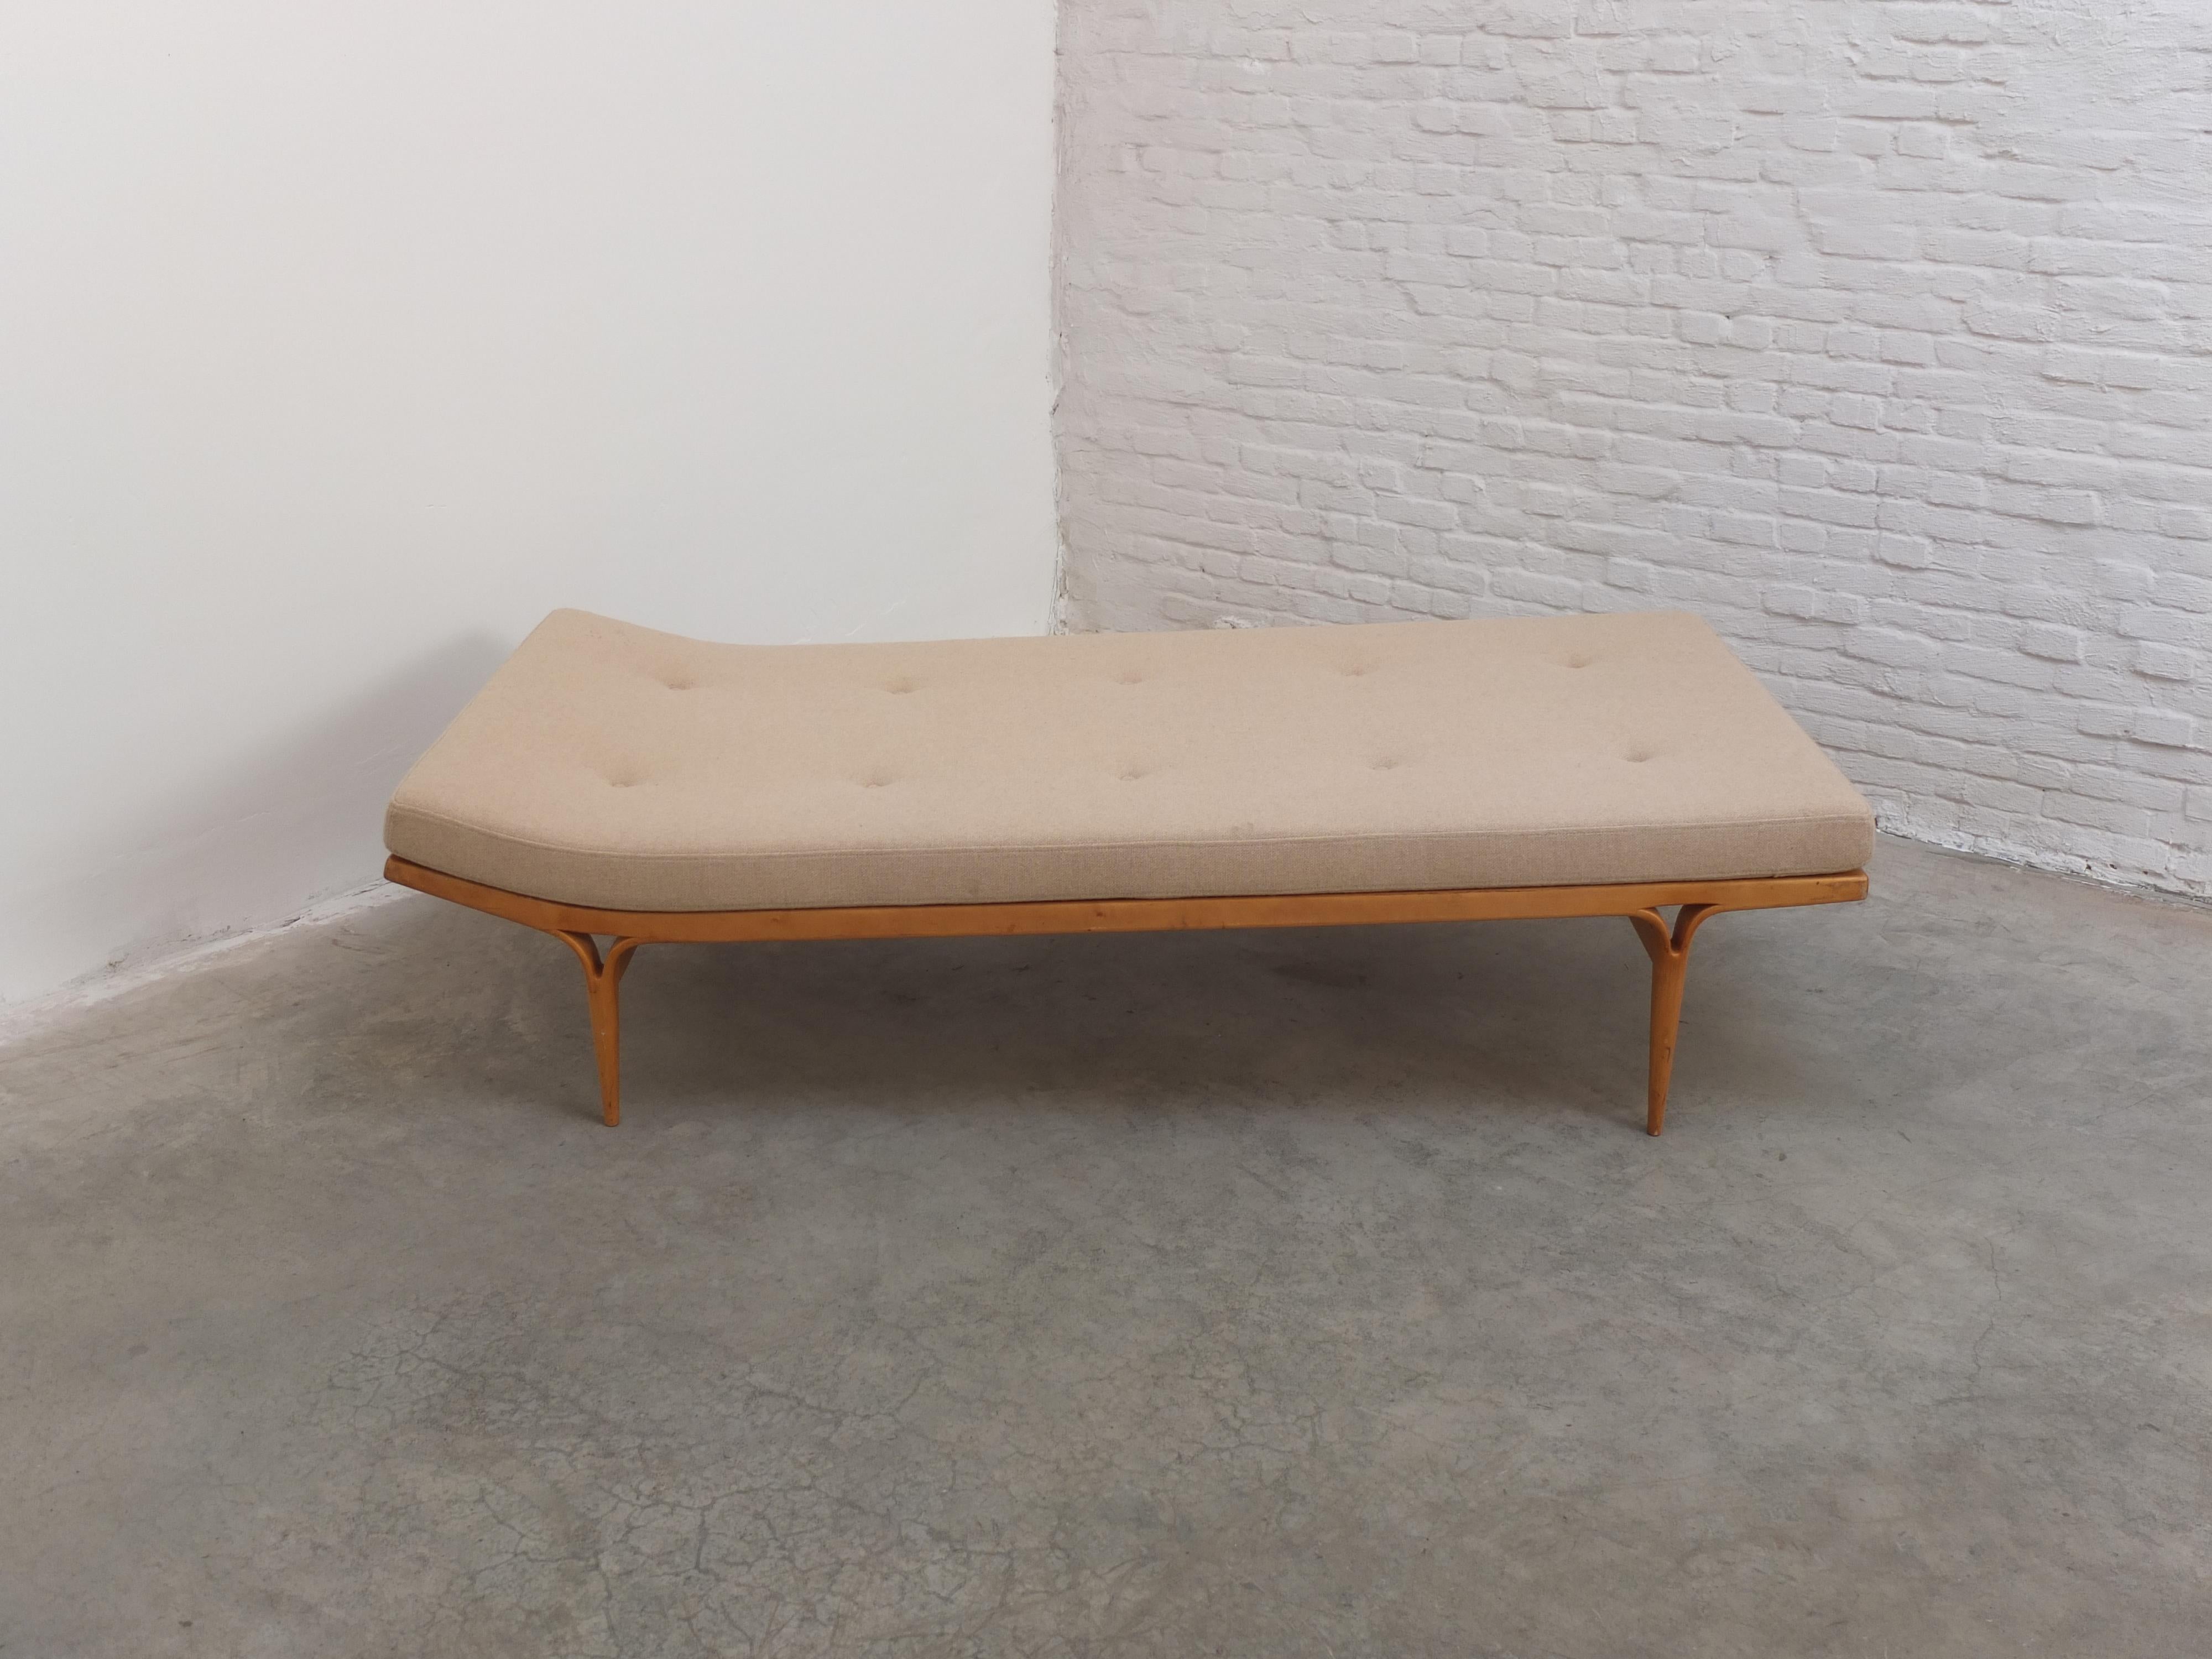 Rare 'Berlin' Daybed by Bruno Mathsson for Karl Mathsson, 1957 For Sale 2